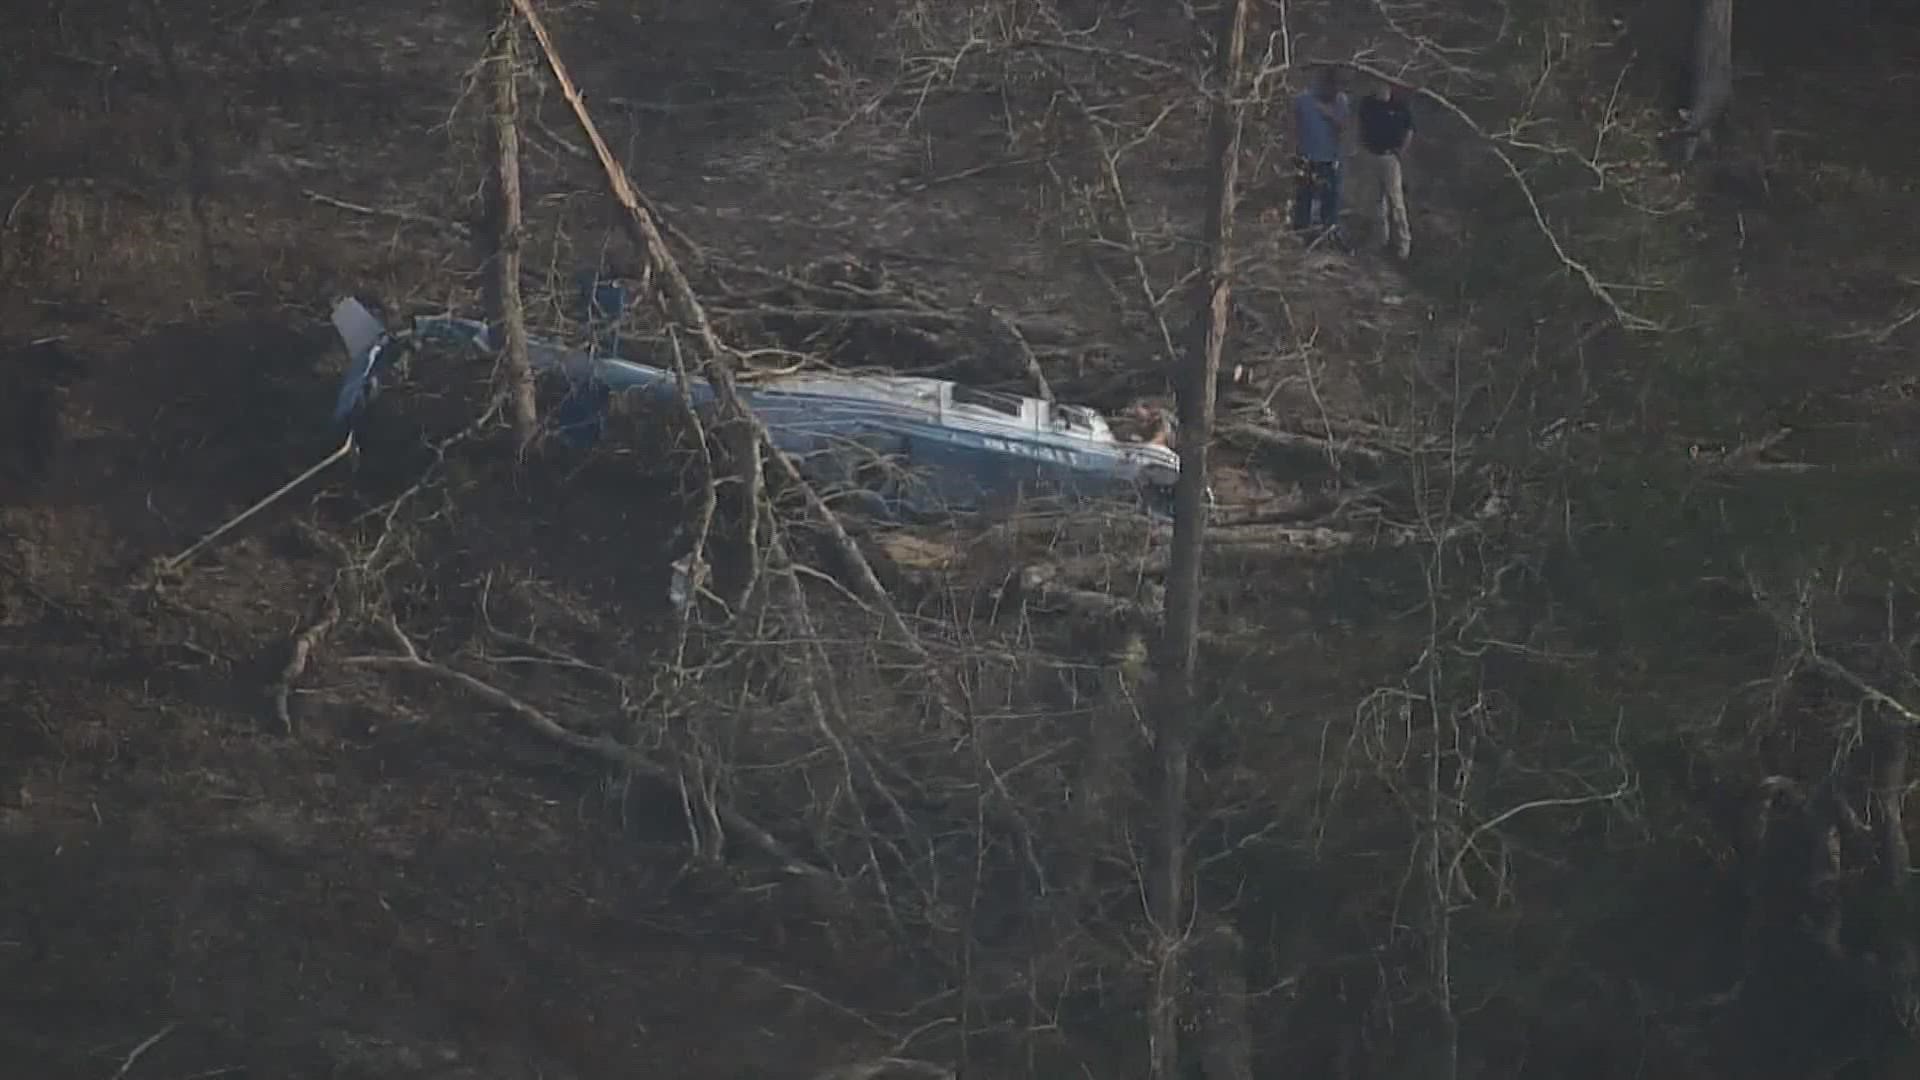 Texas DPS officials said the helicopter crashed in Polk County just before noon on Thursday.